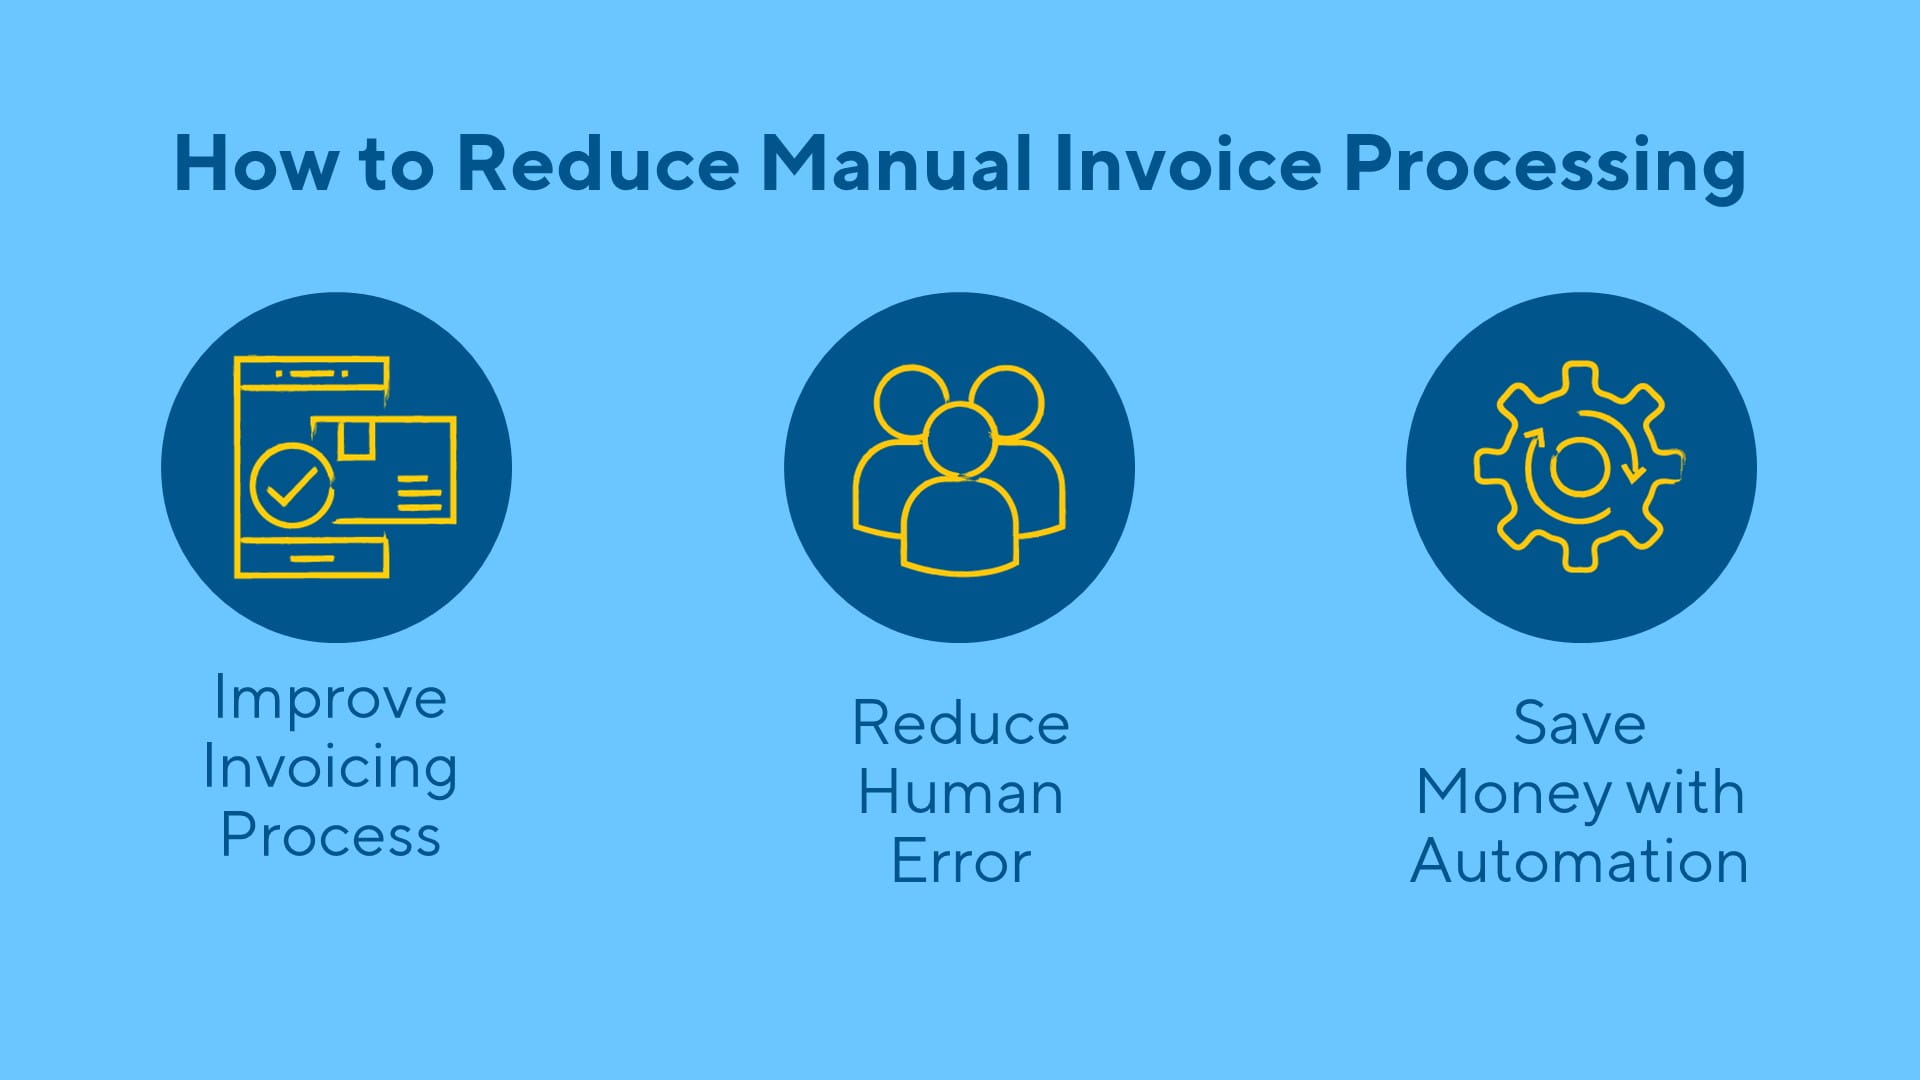 Improve the invoicing process, reduce human error and save money with automation.